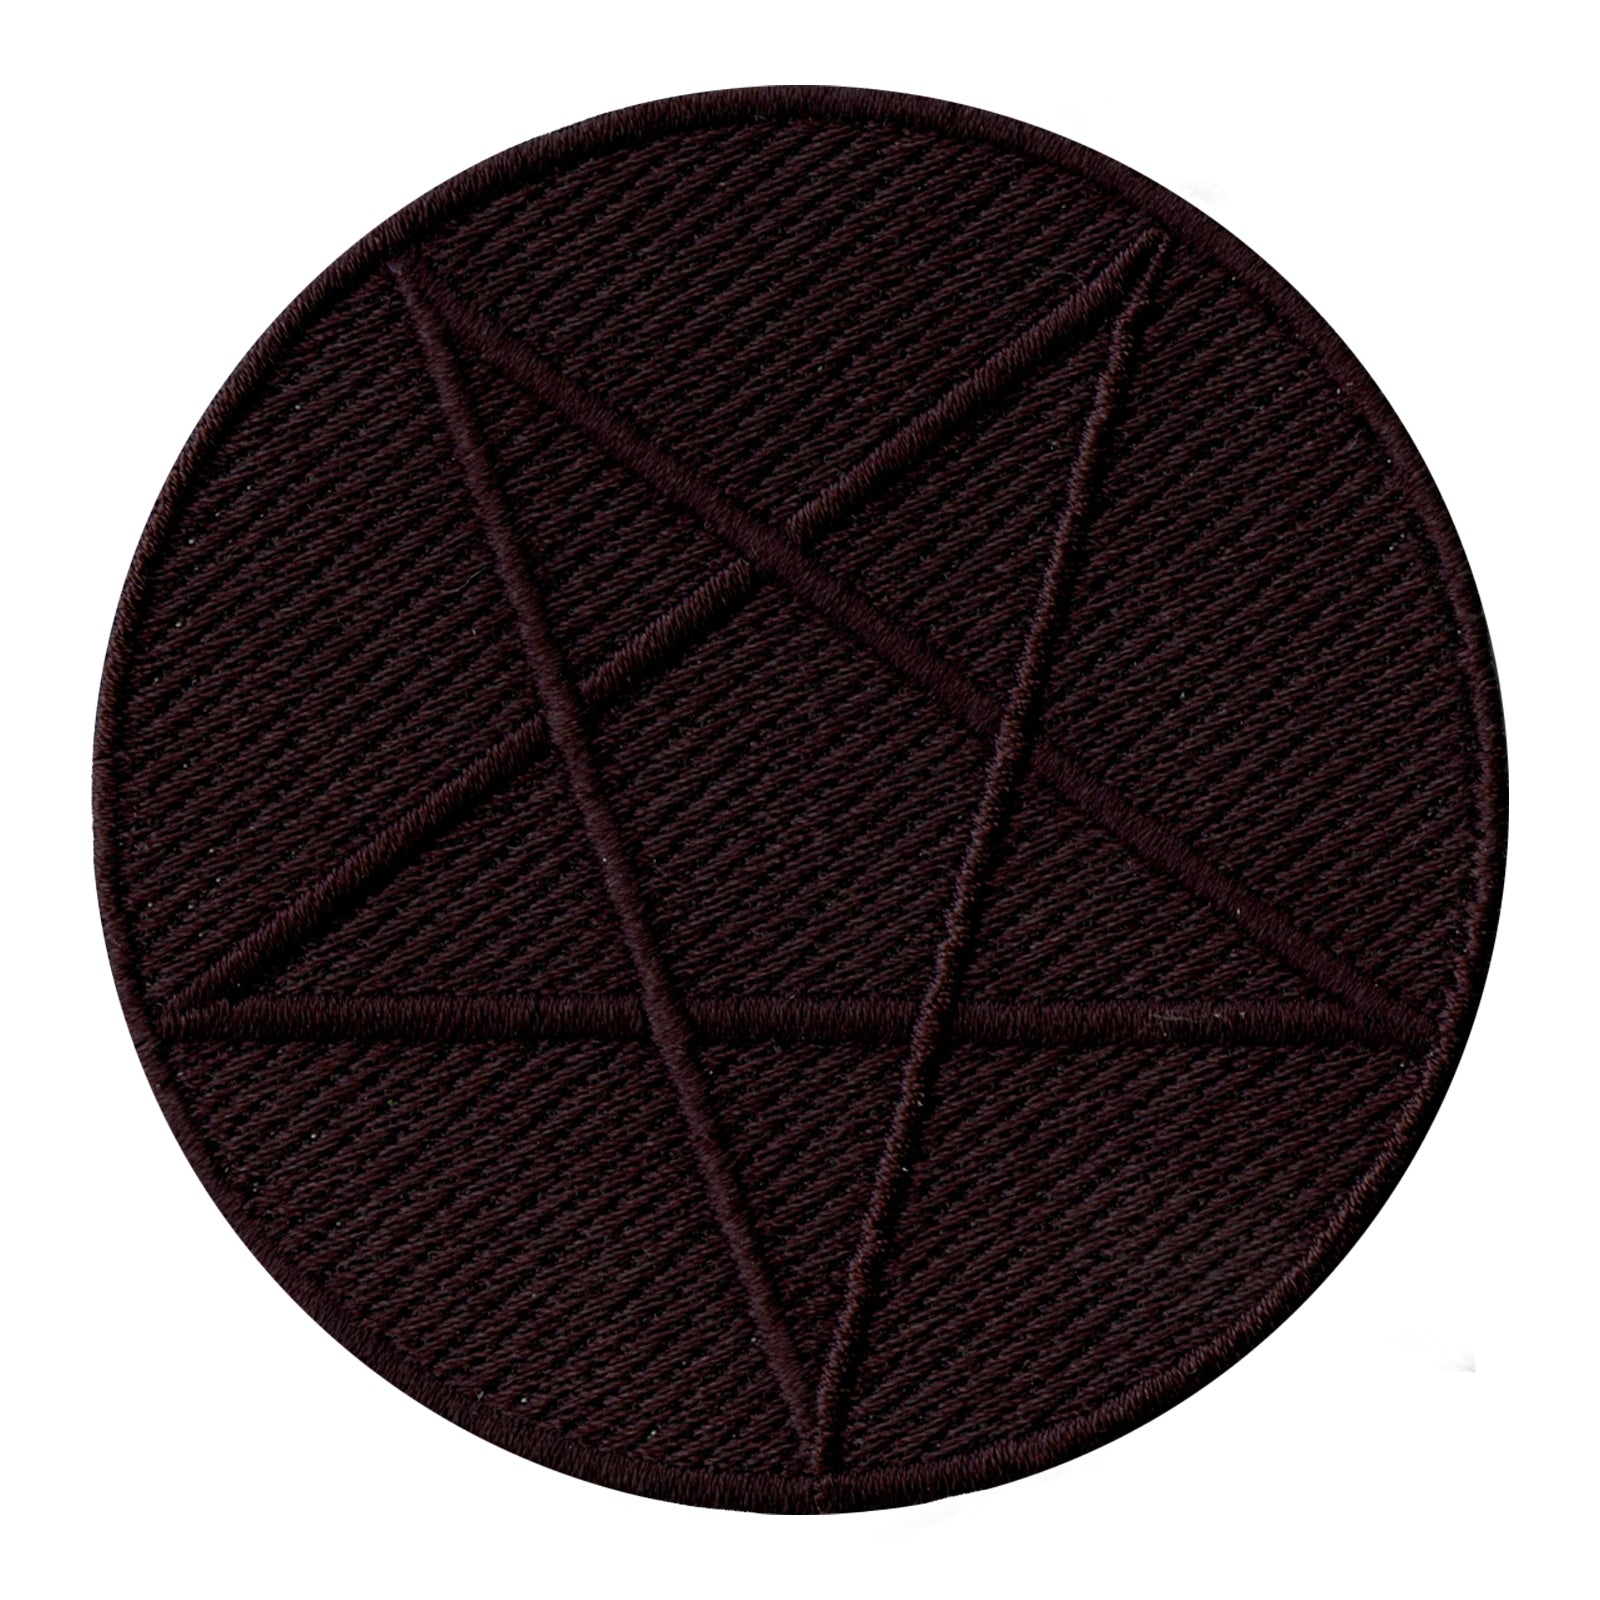 All Black Pentagram Symbol Iron On Embroidered Patch 